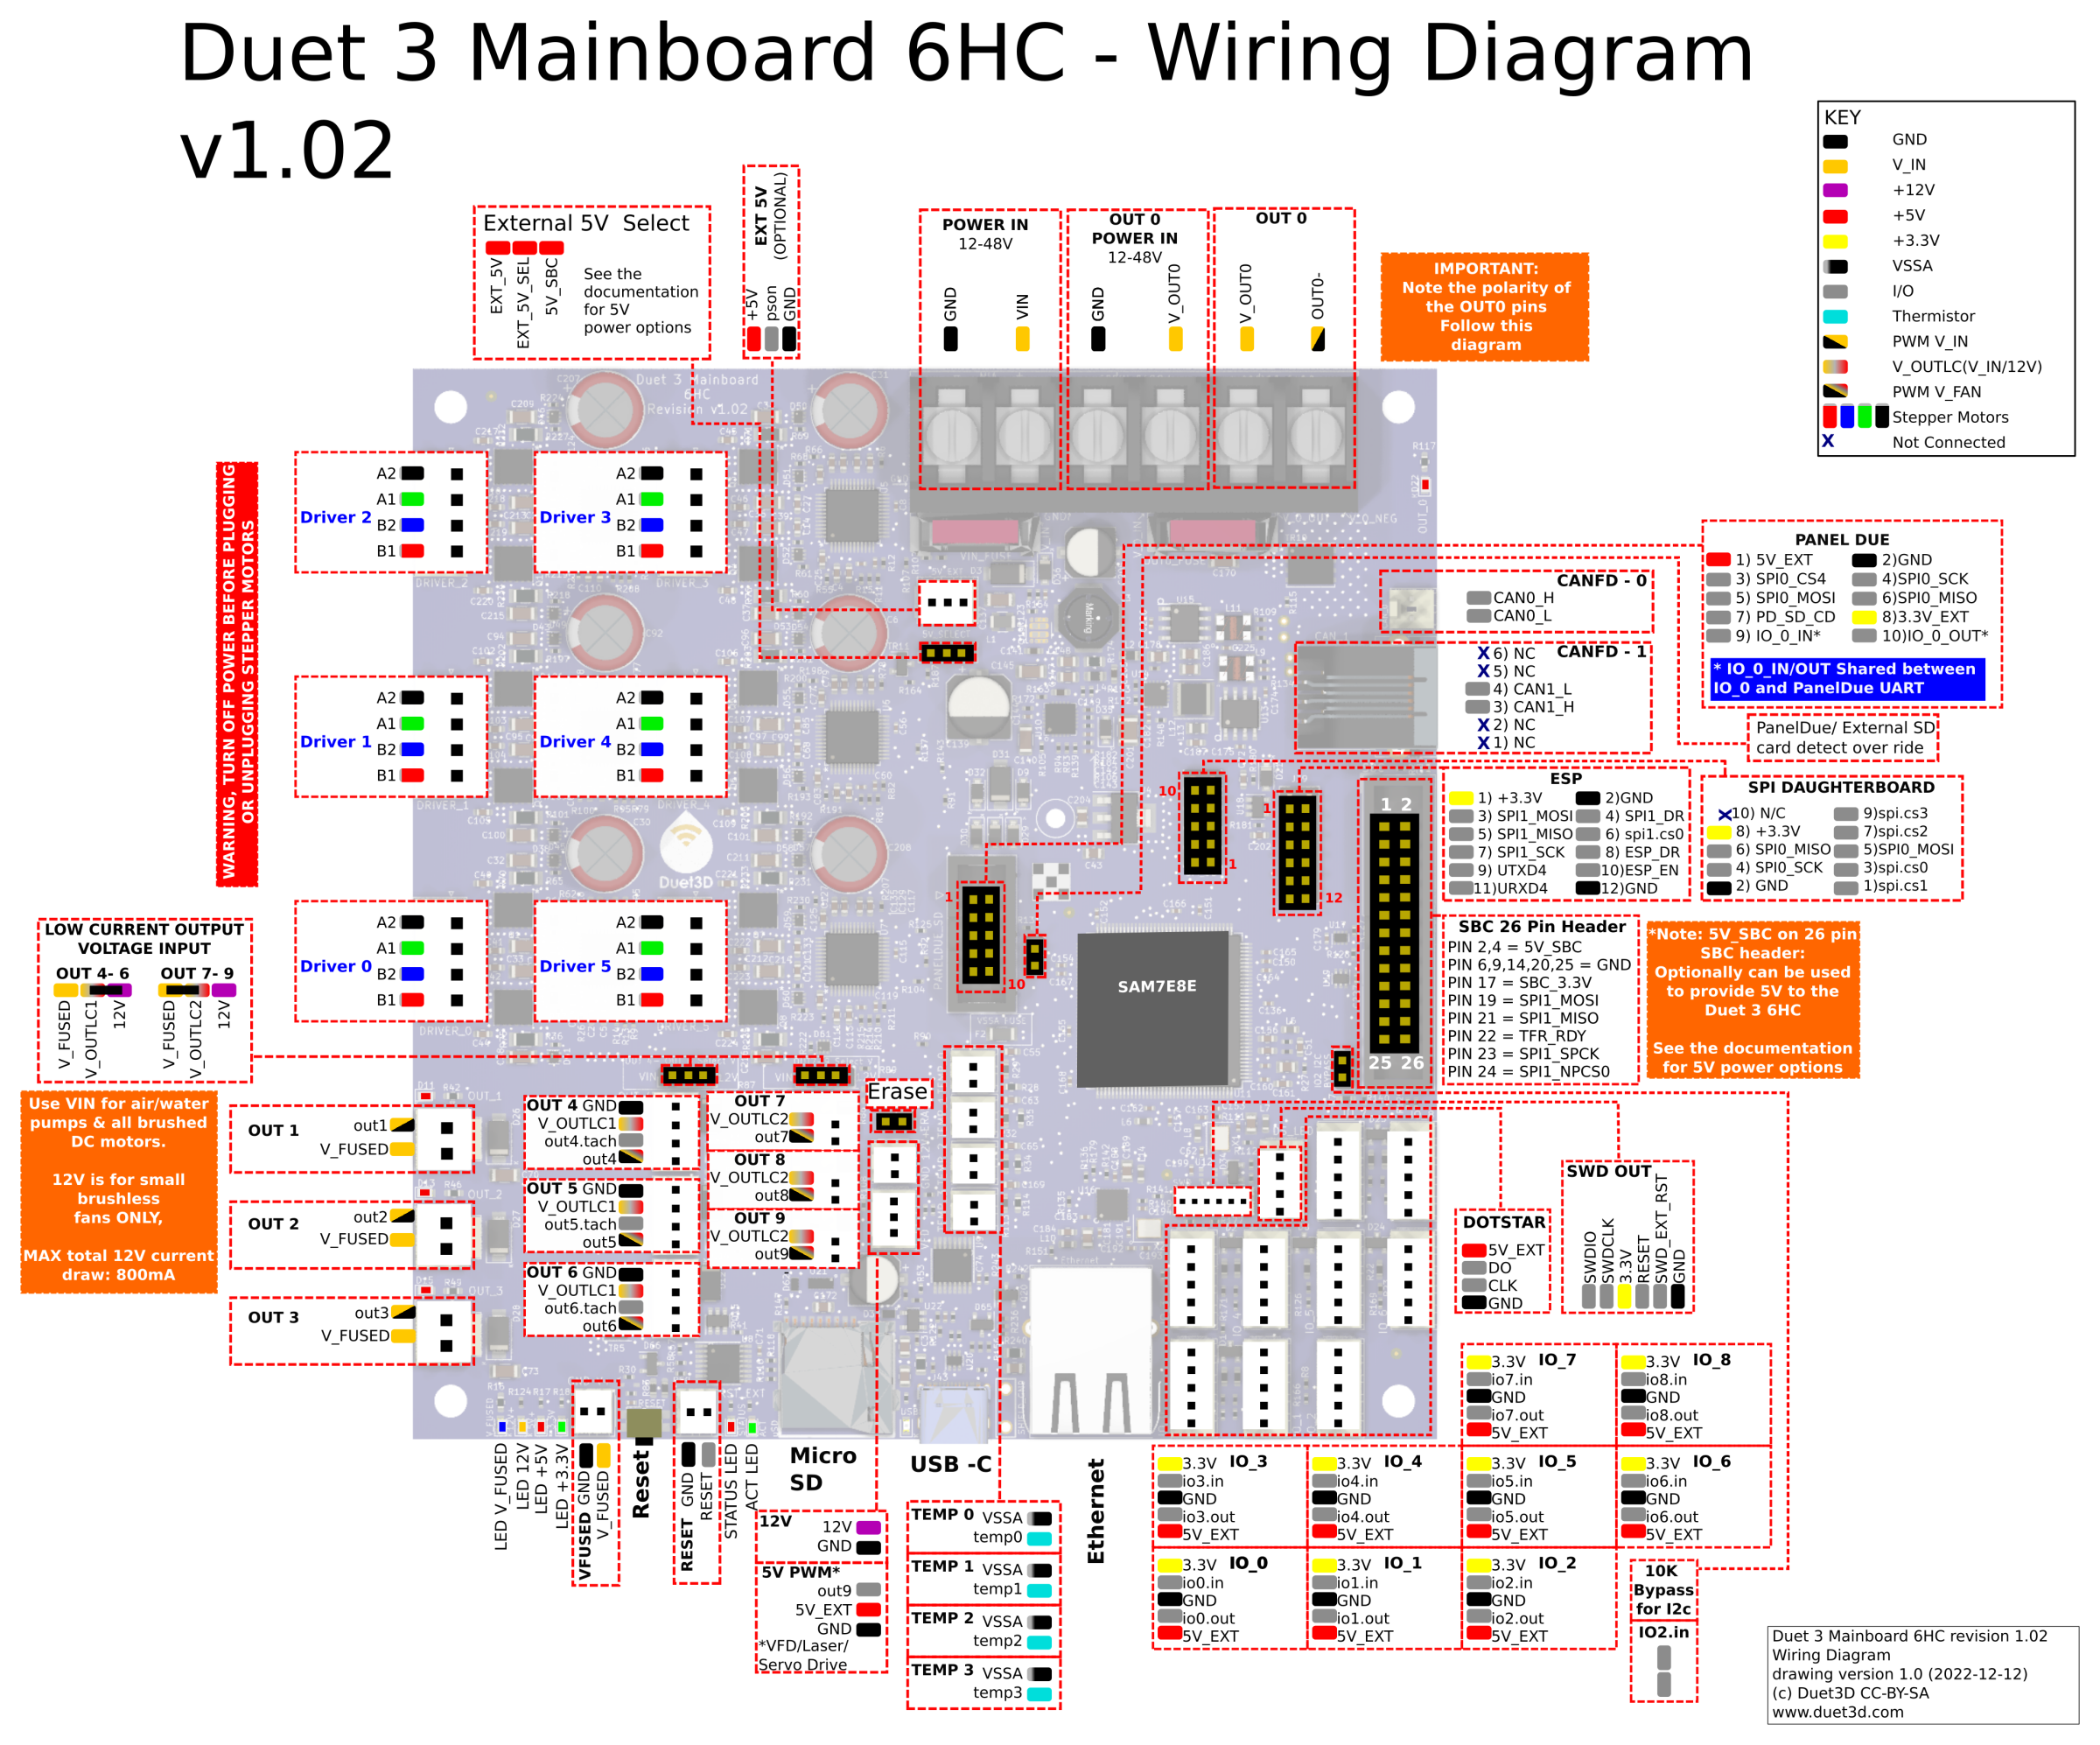 Duet 3 MB 6HC v1.02 wiring diagram shwoing all the pin connections, click on the image for a larger version